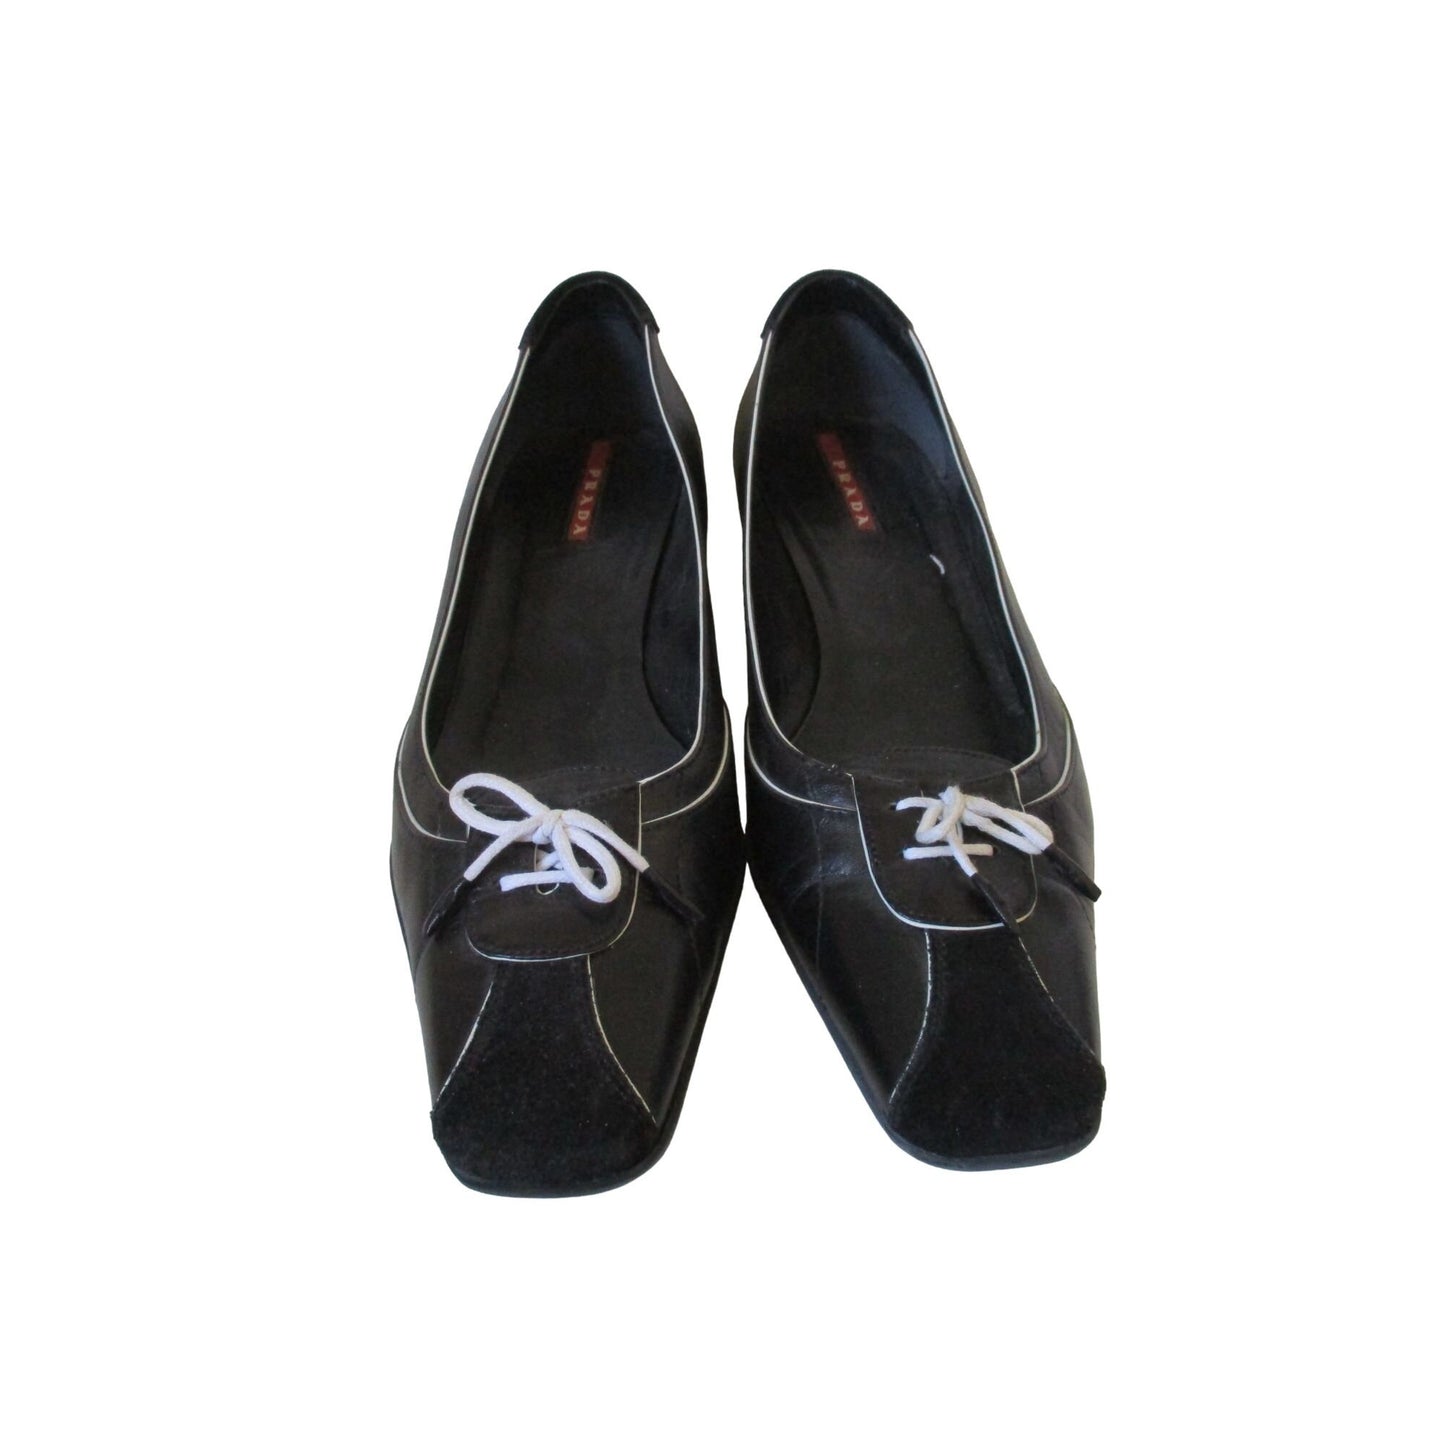 Prada Sport black leather 37.5 kitten heels with suede accents and white bows and white tonal stitching